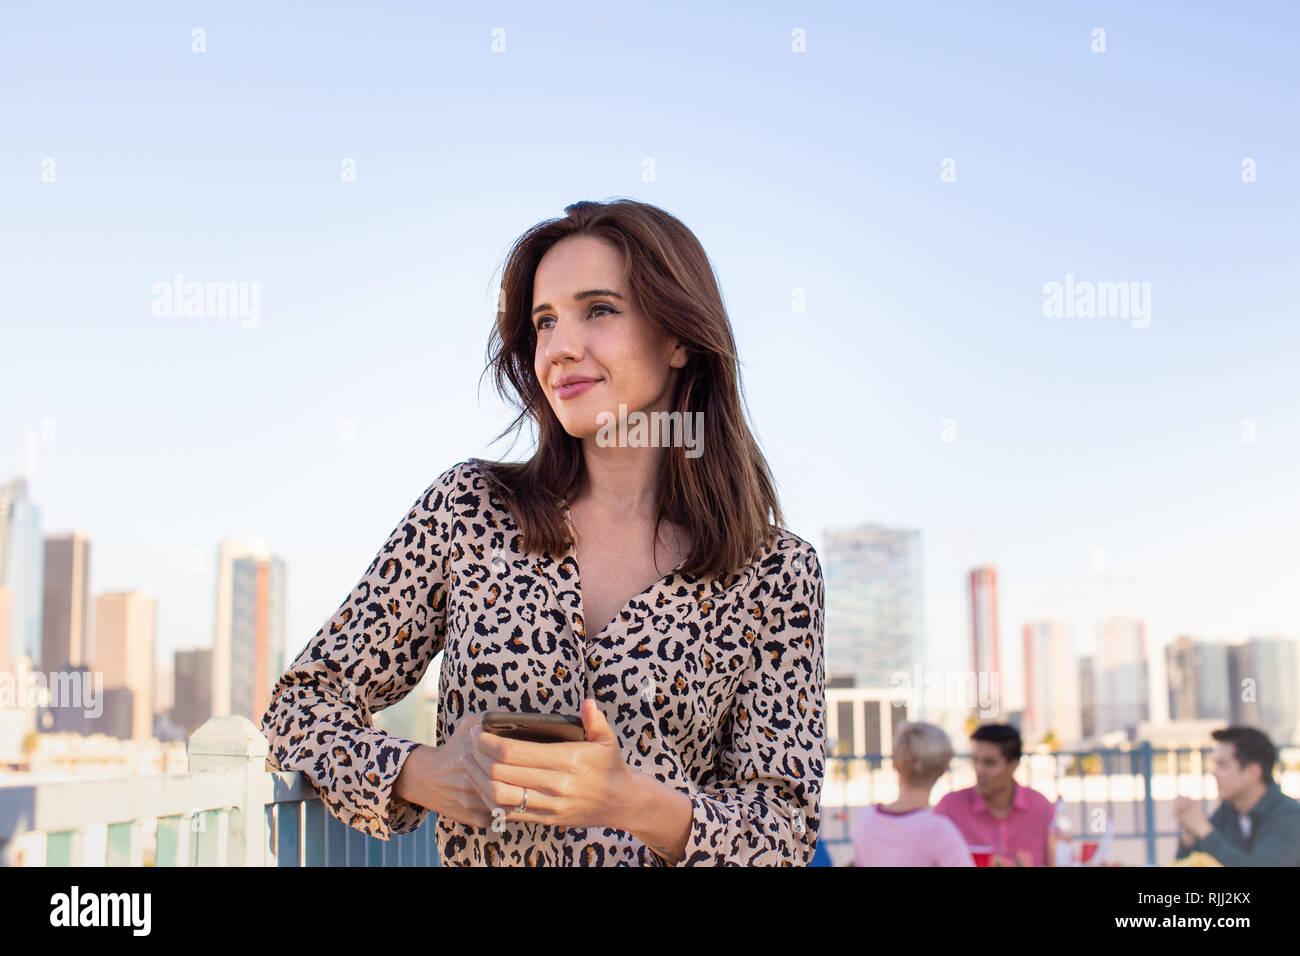 Young adult female looking out across city at a rooftop party Stock Photo